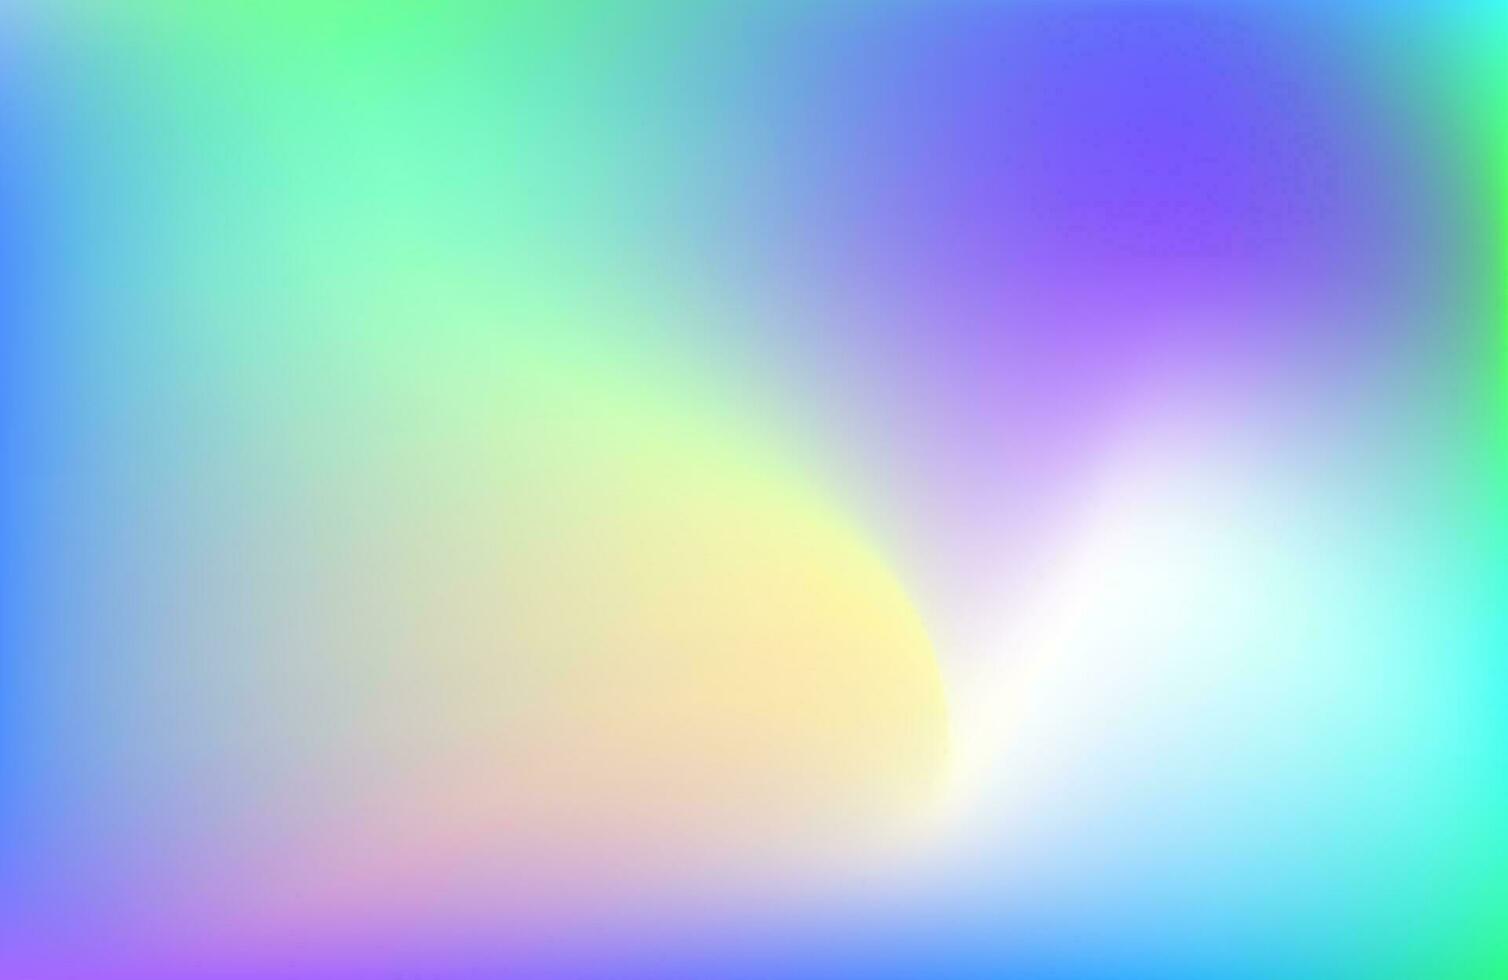 Colorful and vibrant vector liquid gradient background for web design and other